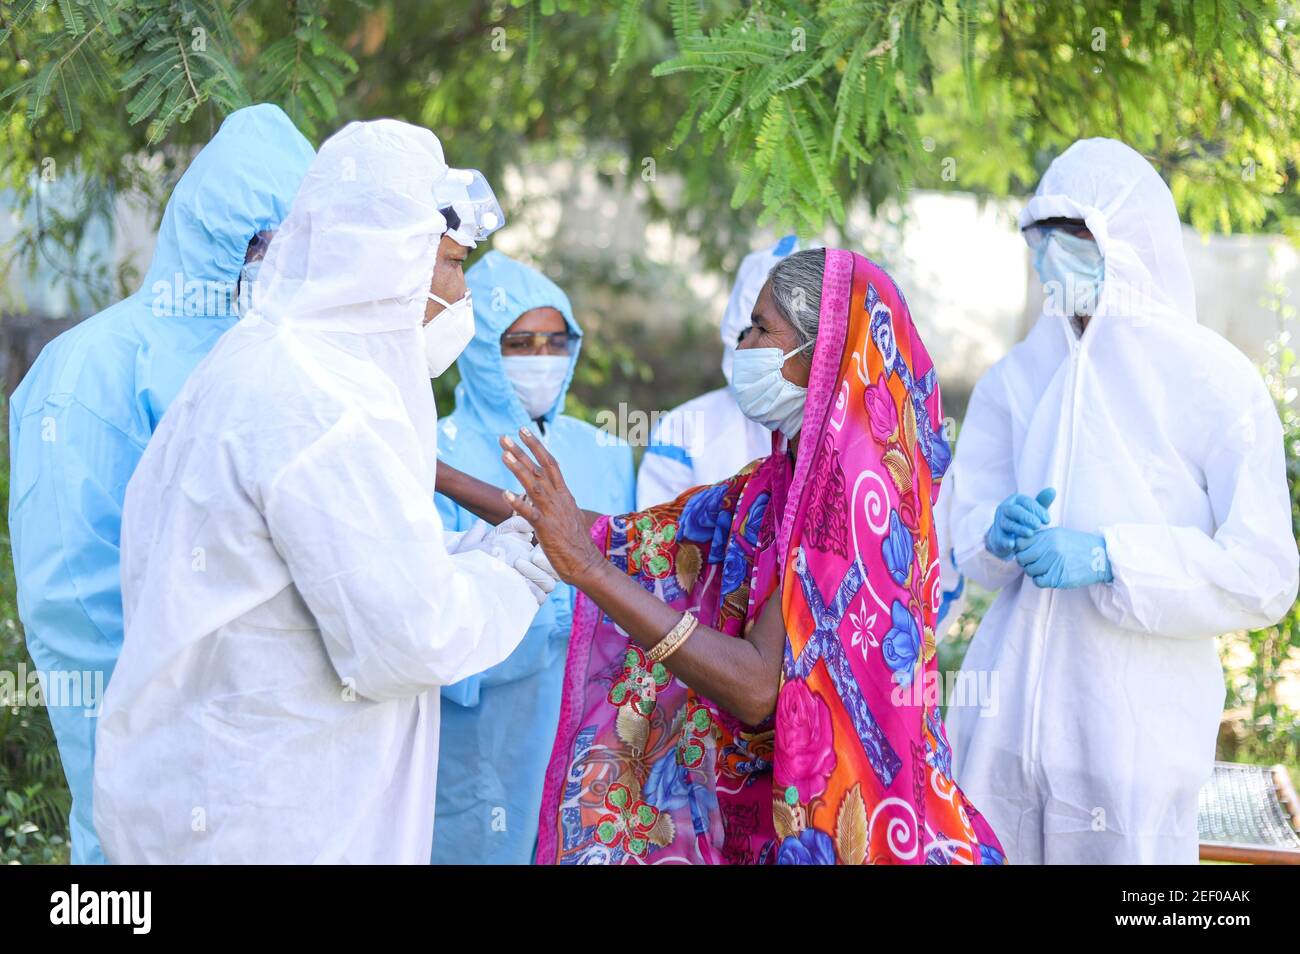 Elderly Indian female communicating with medical workers wearing protective clothing Stock Photo